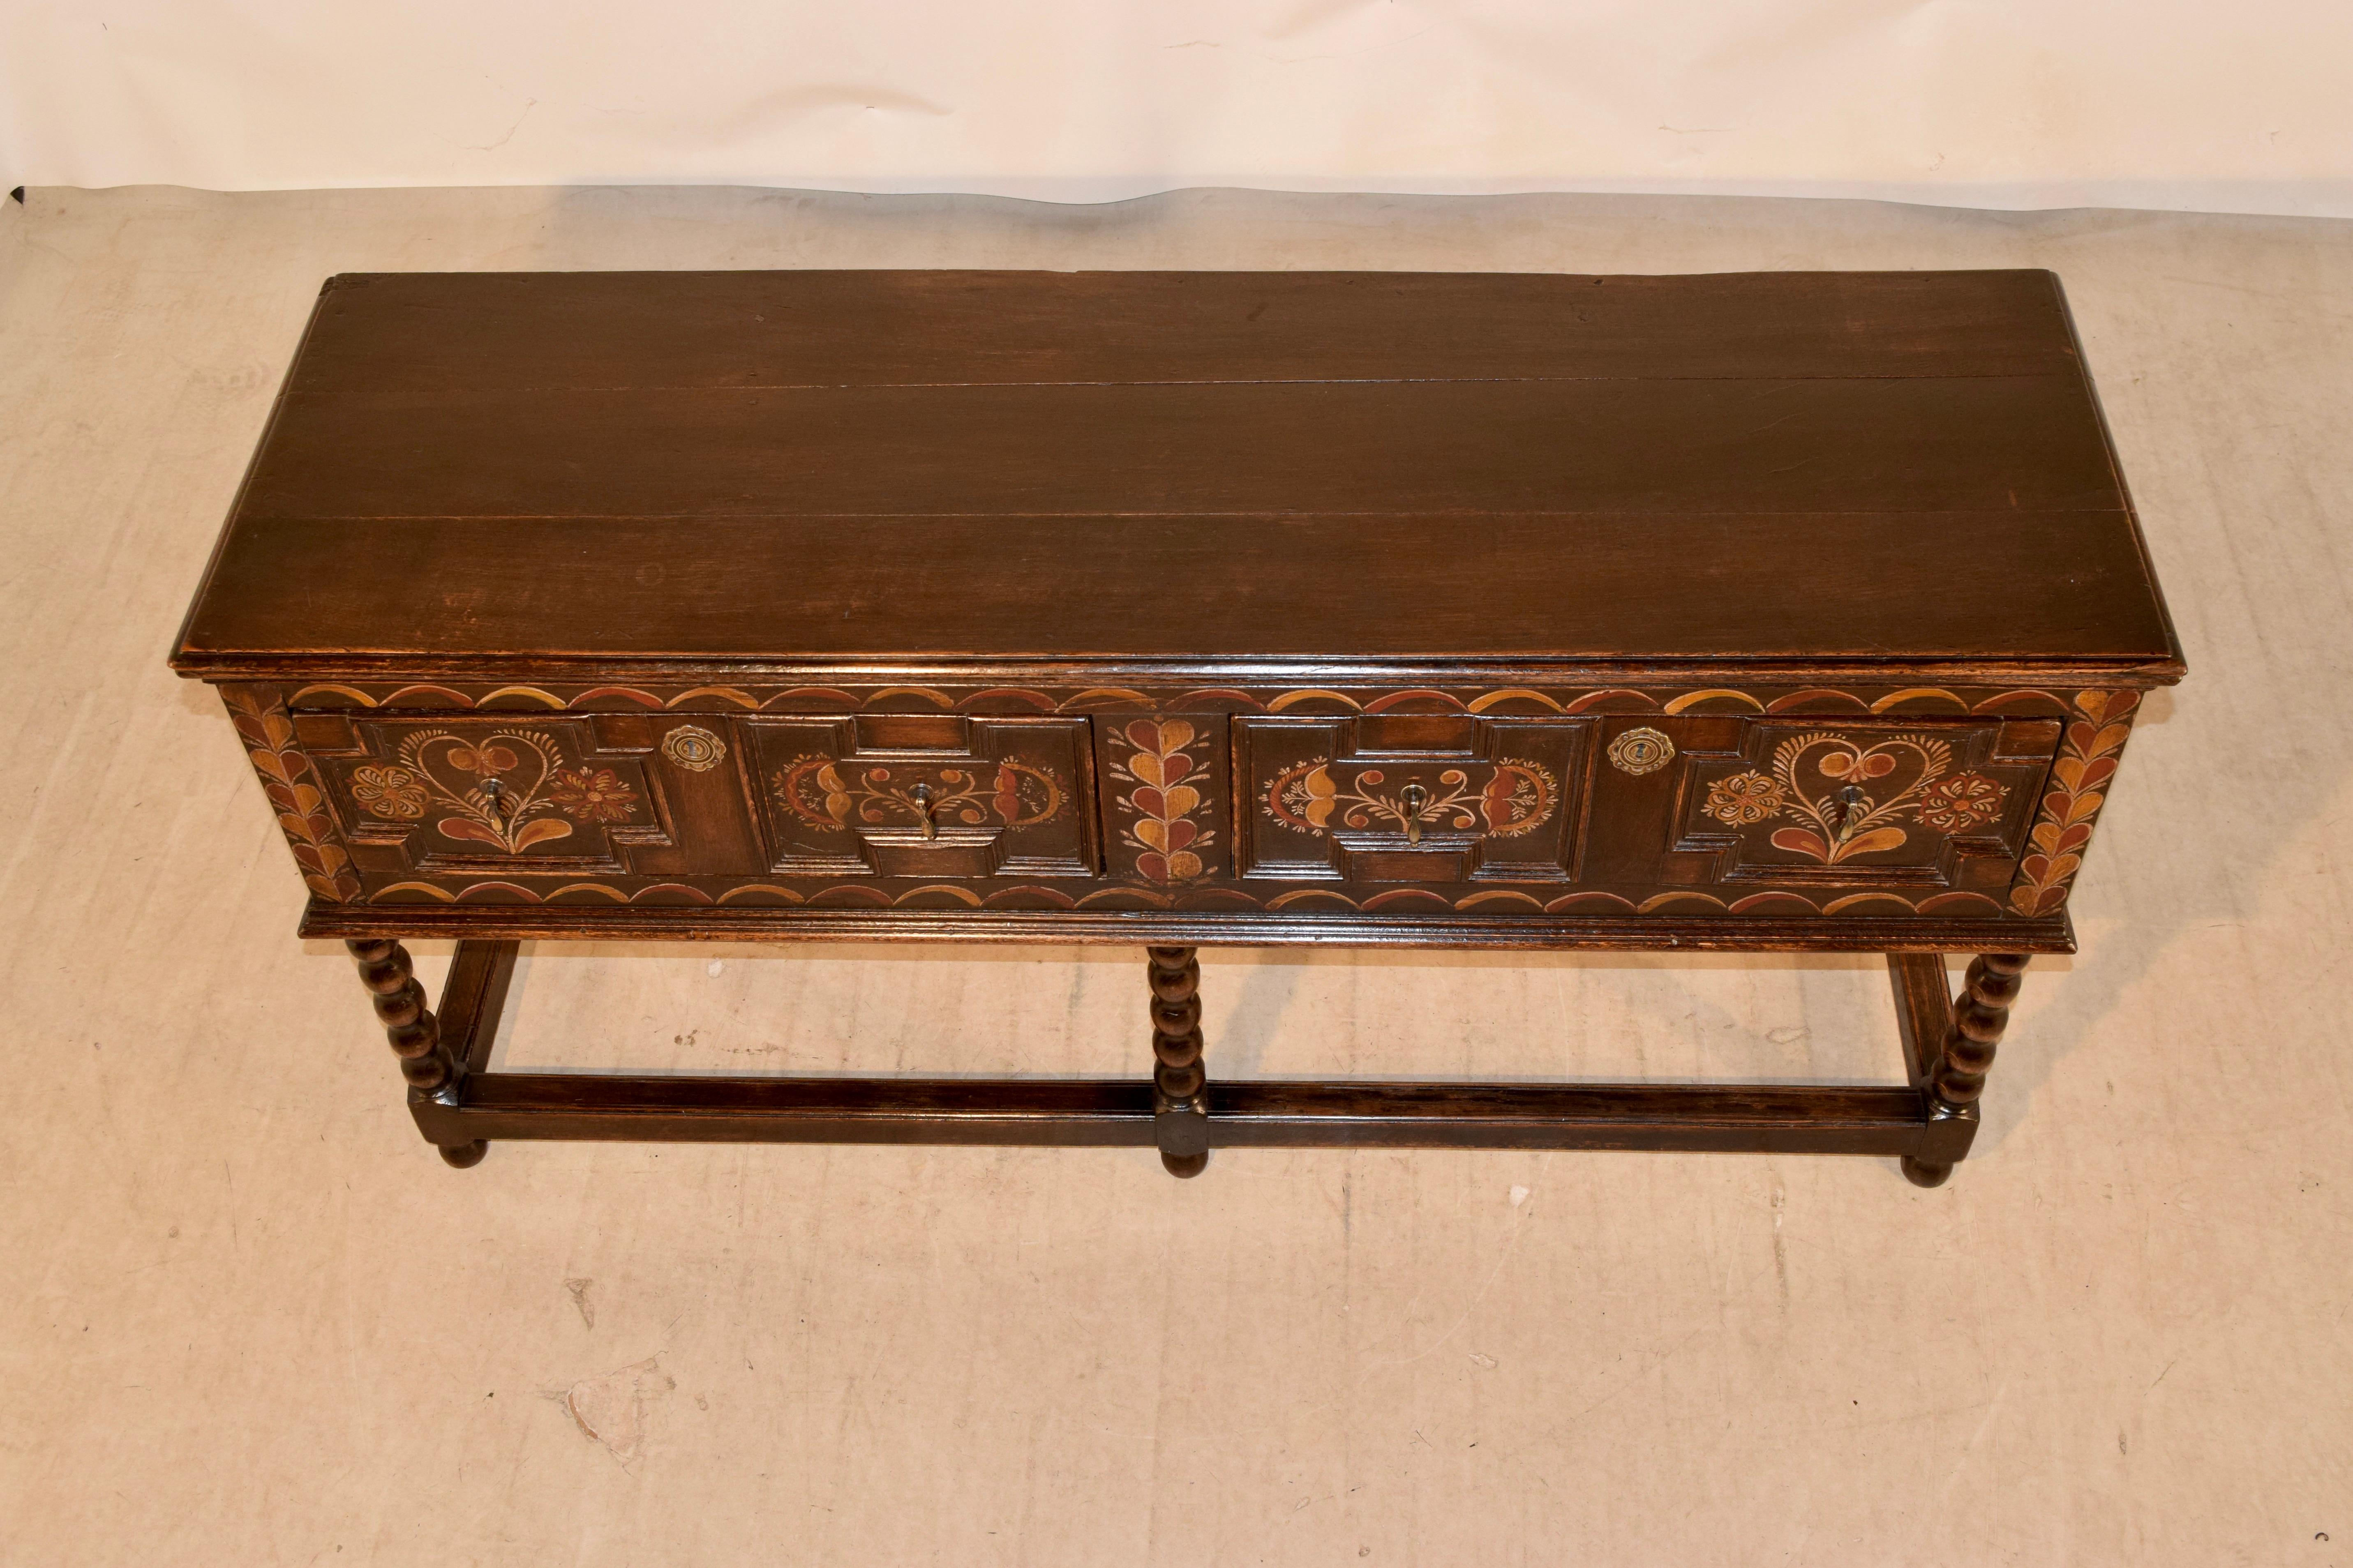 Georgian 18th Century English Oak Sideboard with Painted Decoration